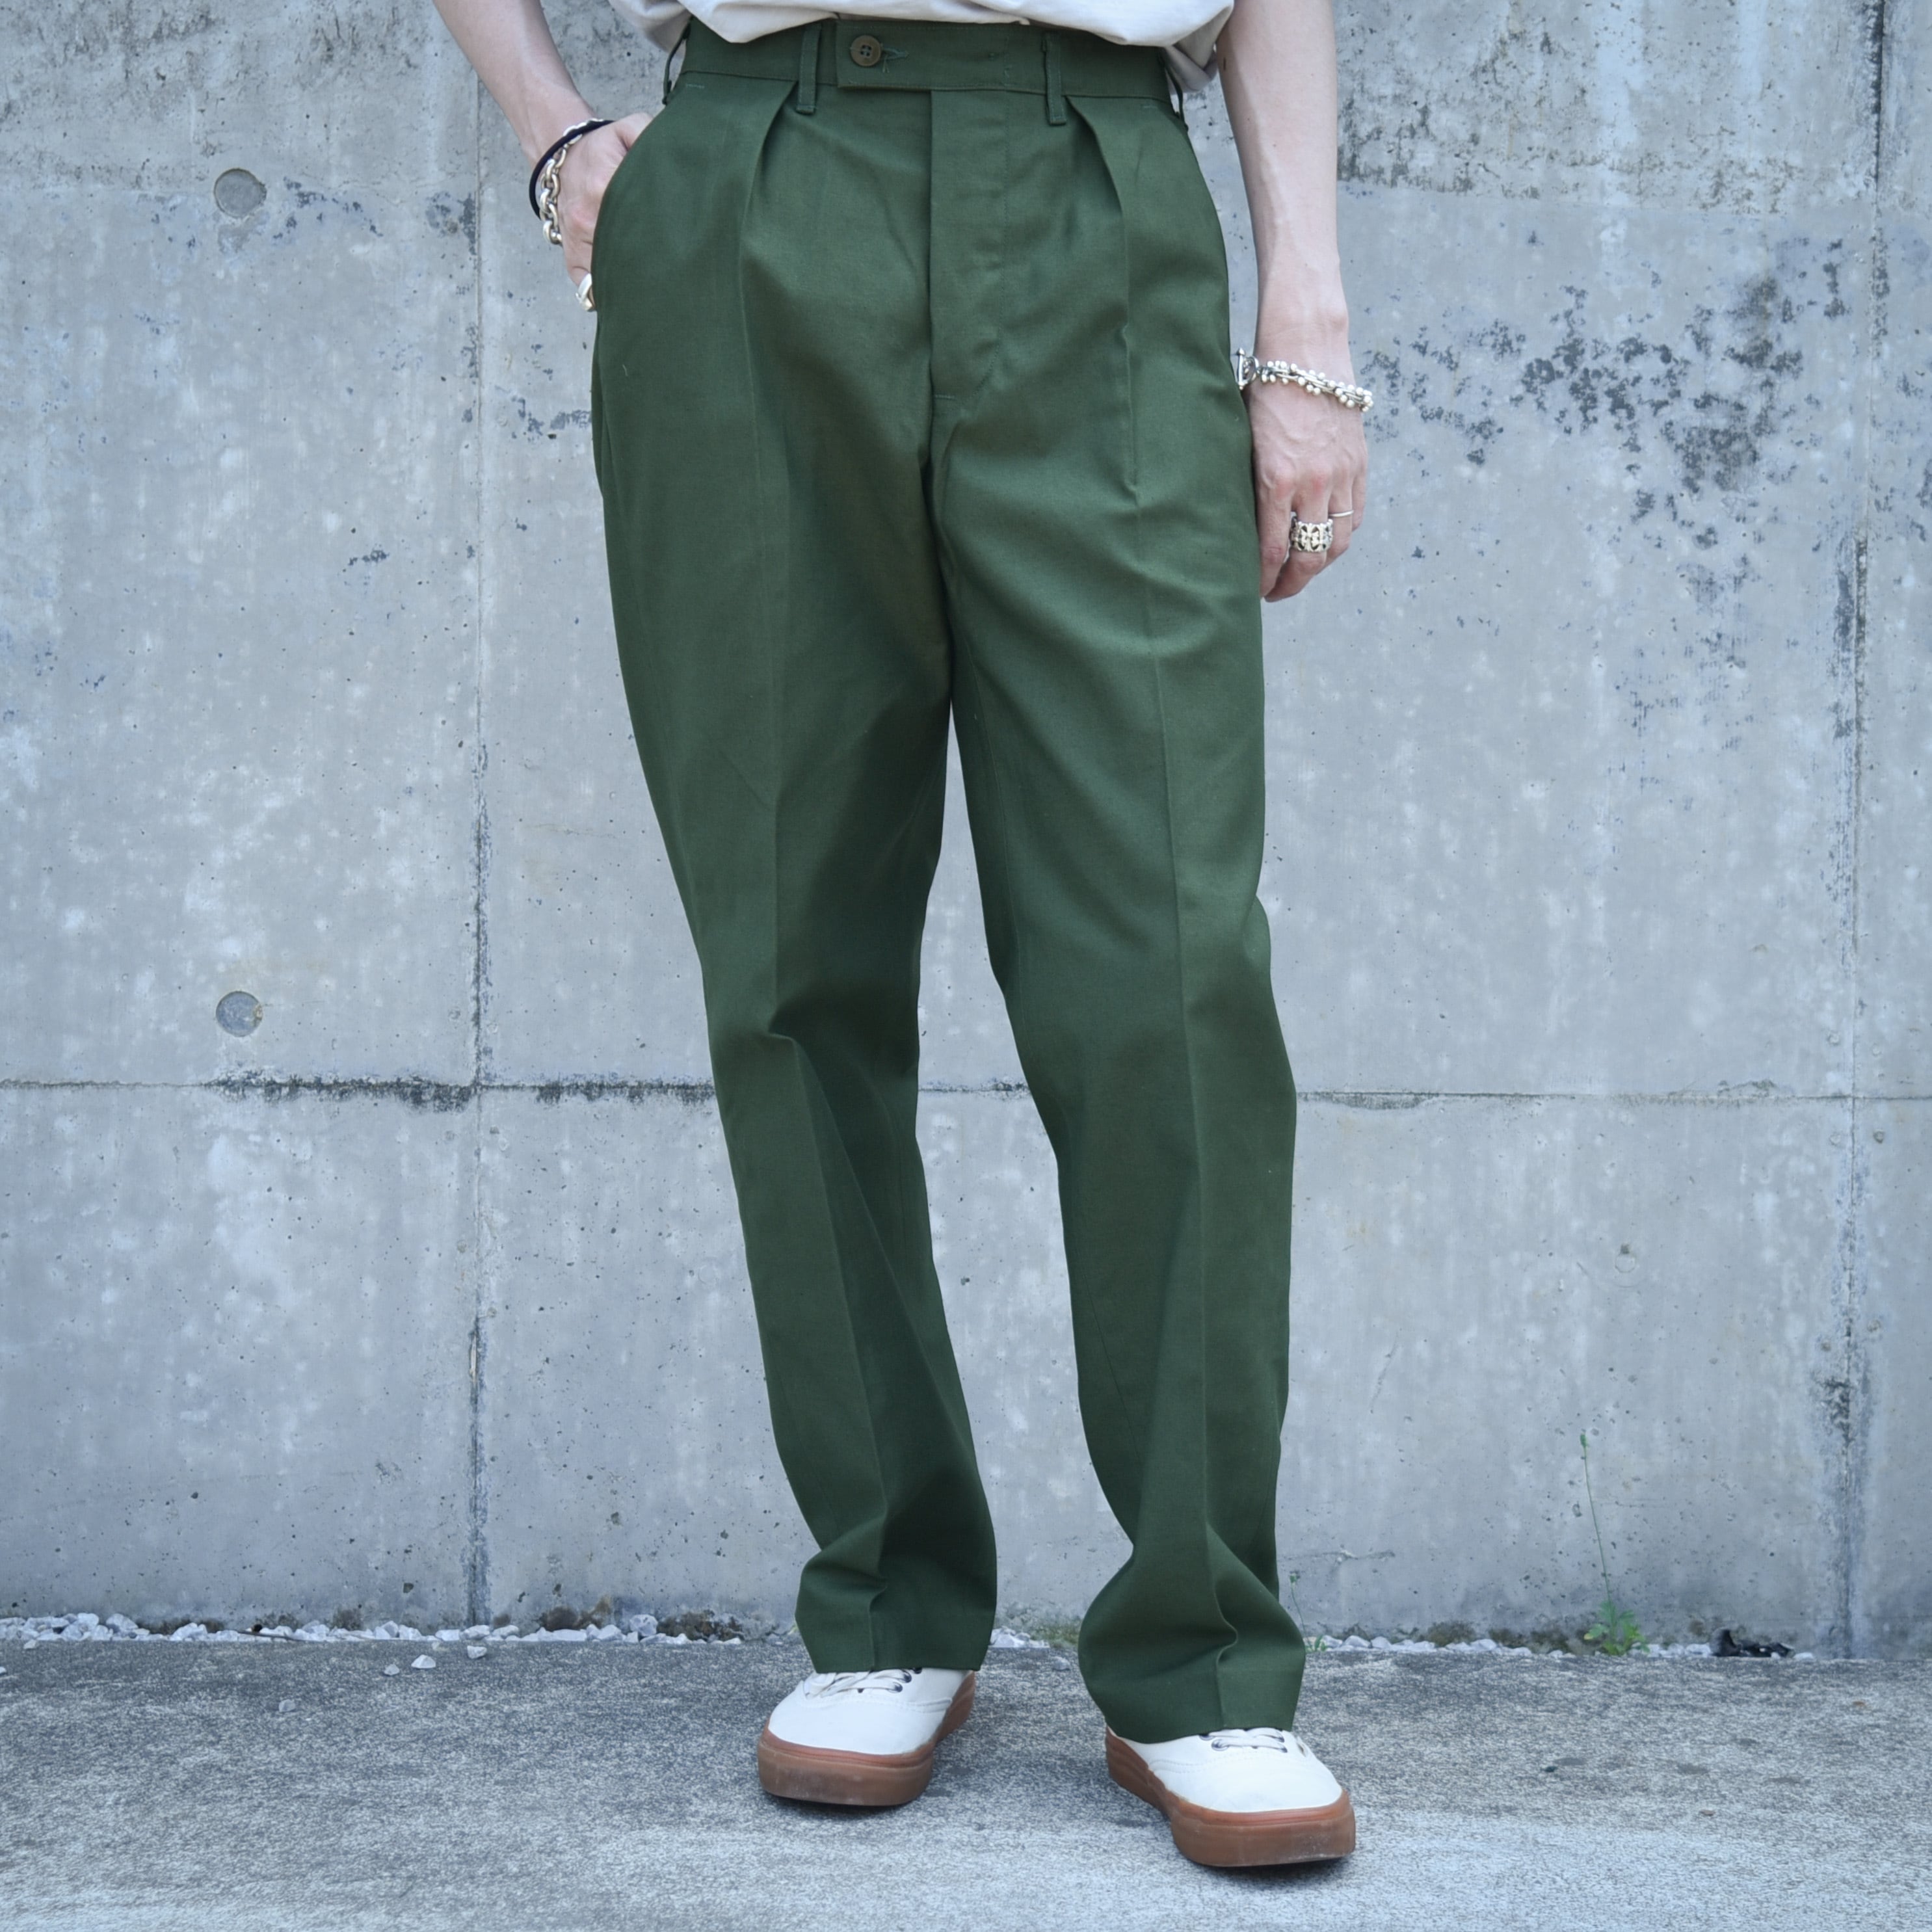 DEAD STOCK】70-80s Swedish Army Utility Trousers スウェーデン軍